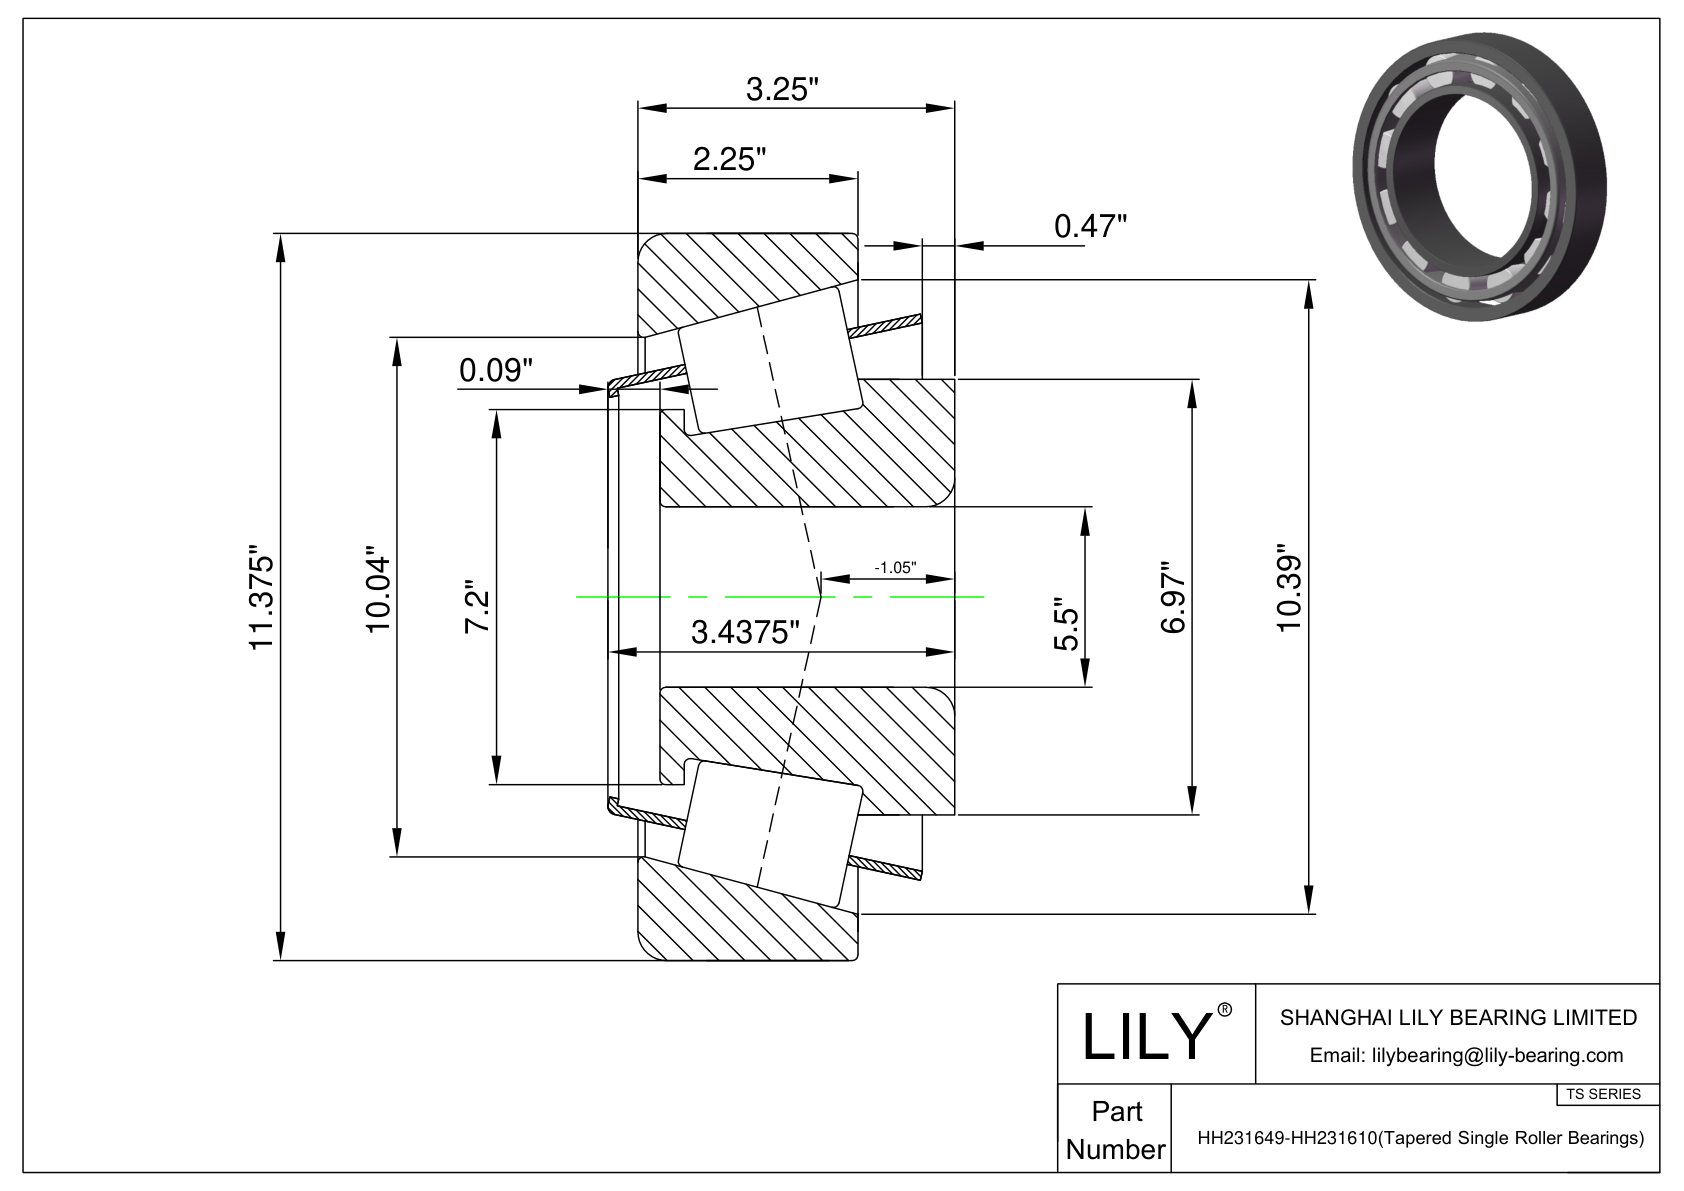 HH231649-HH231610 TS (Tapered Single Roller Bearings) (Imperial) cad drawing